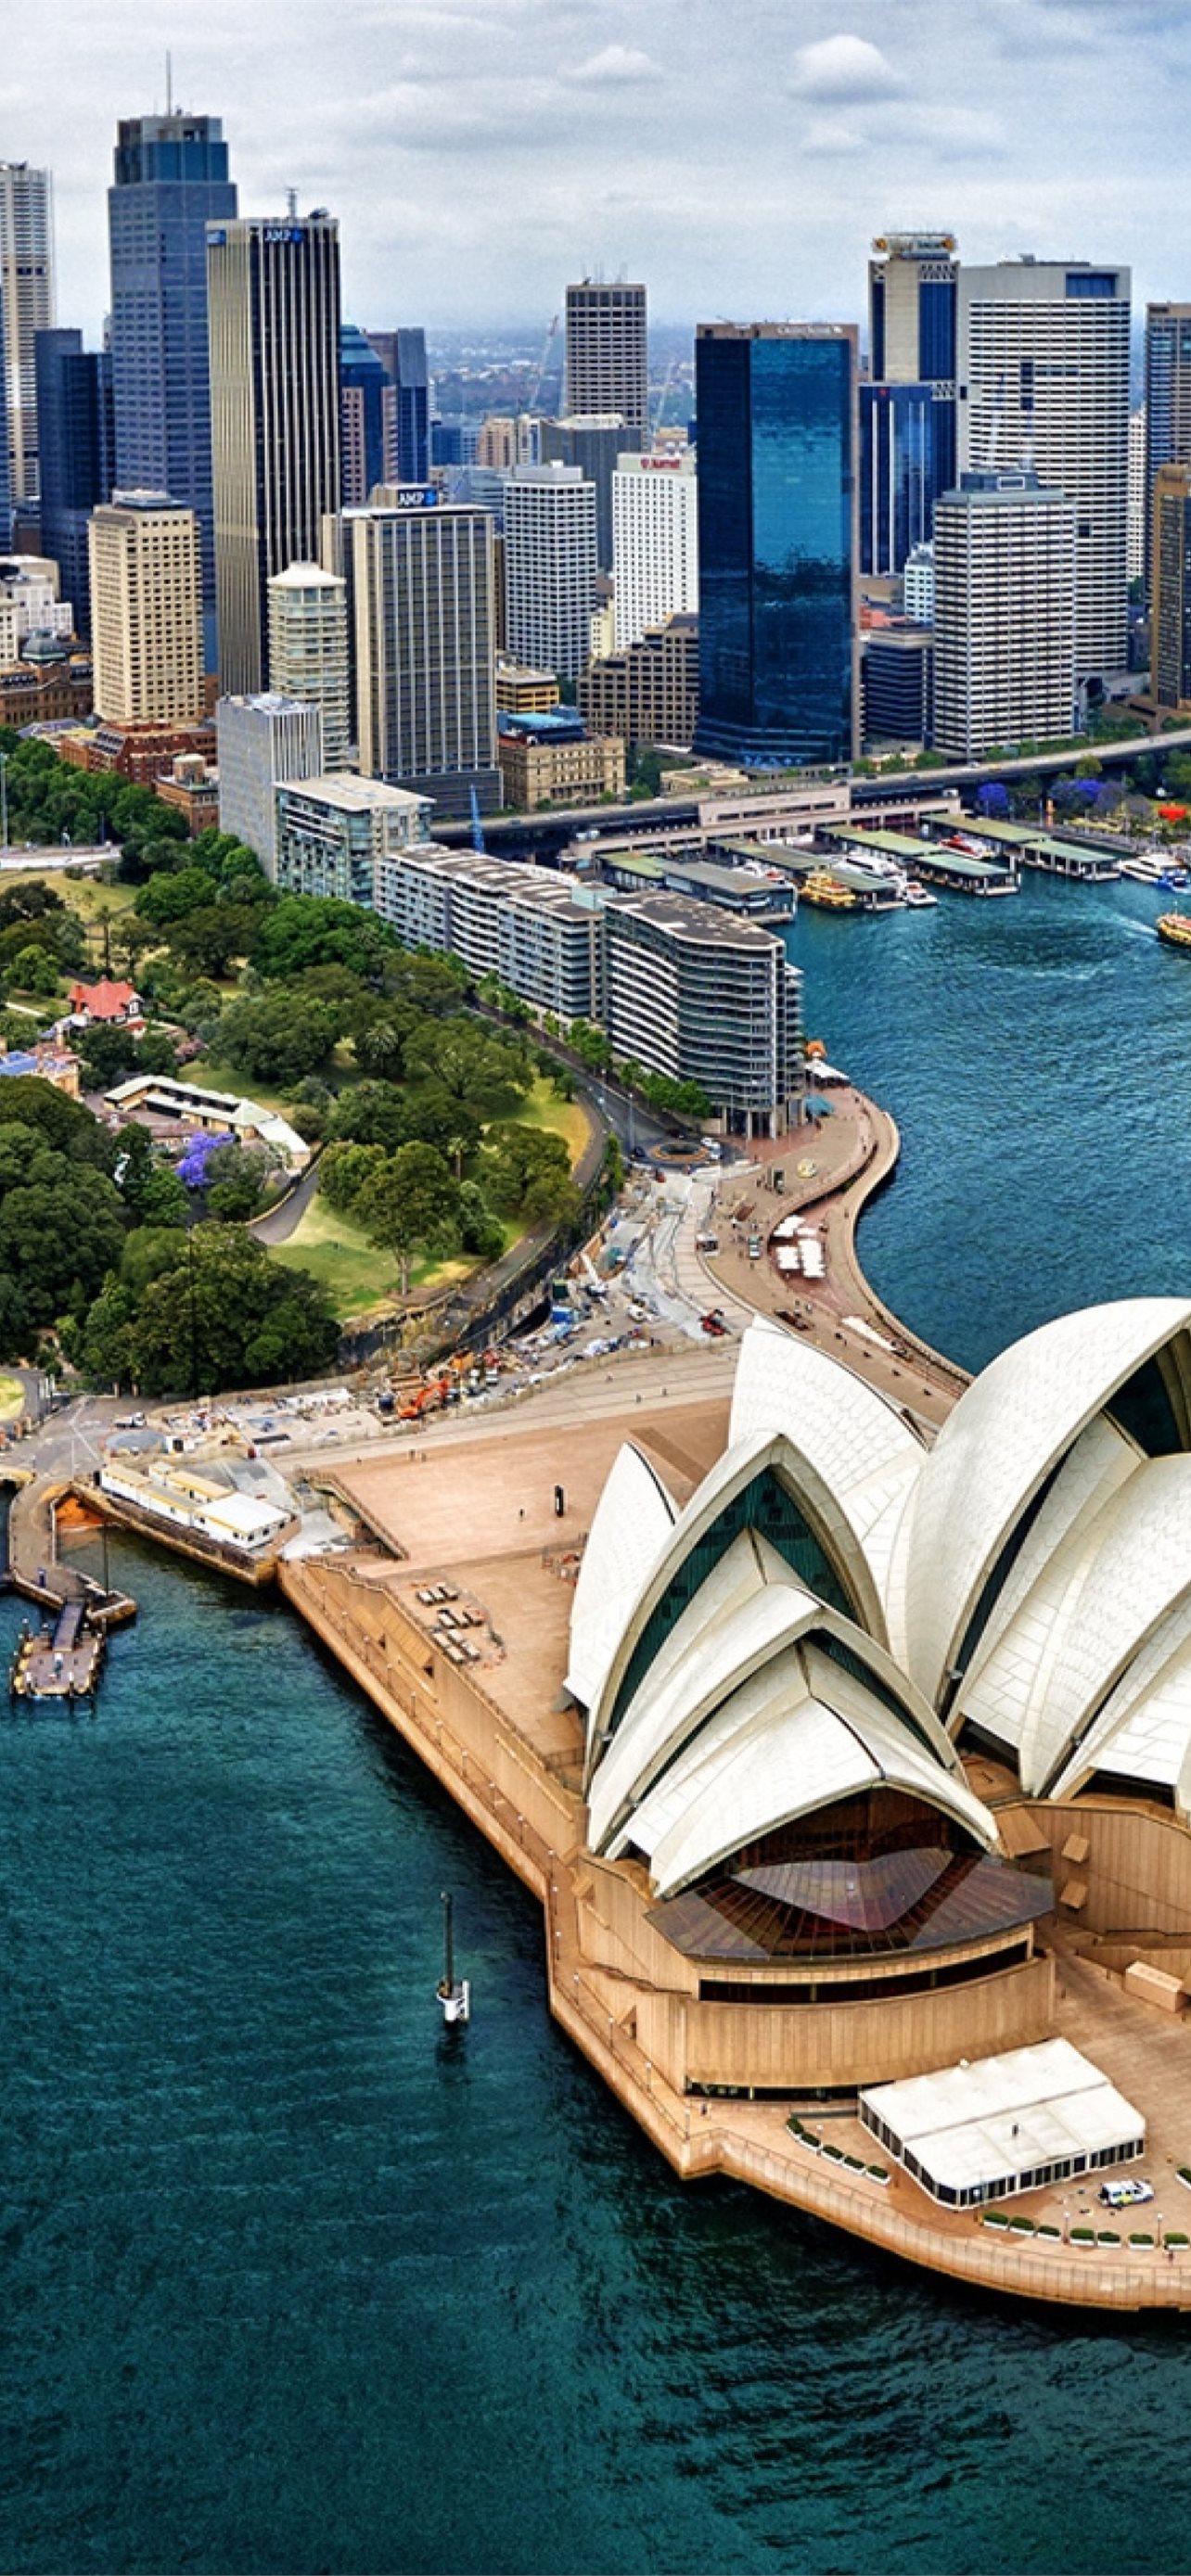 Sydney Opera House Iphone Wallpapers Free Download